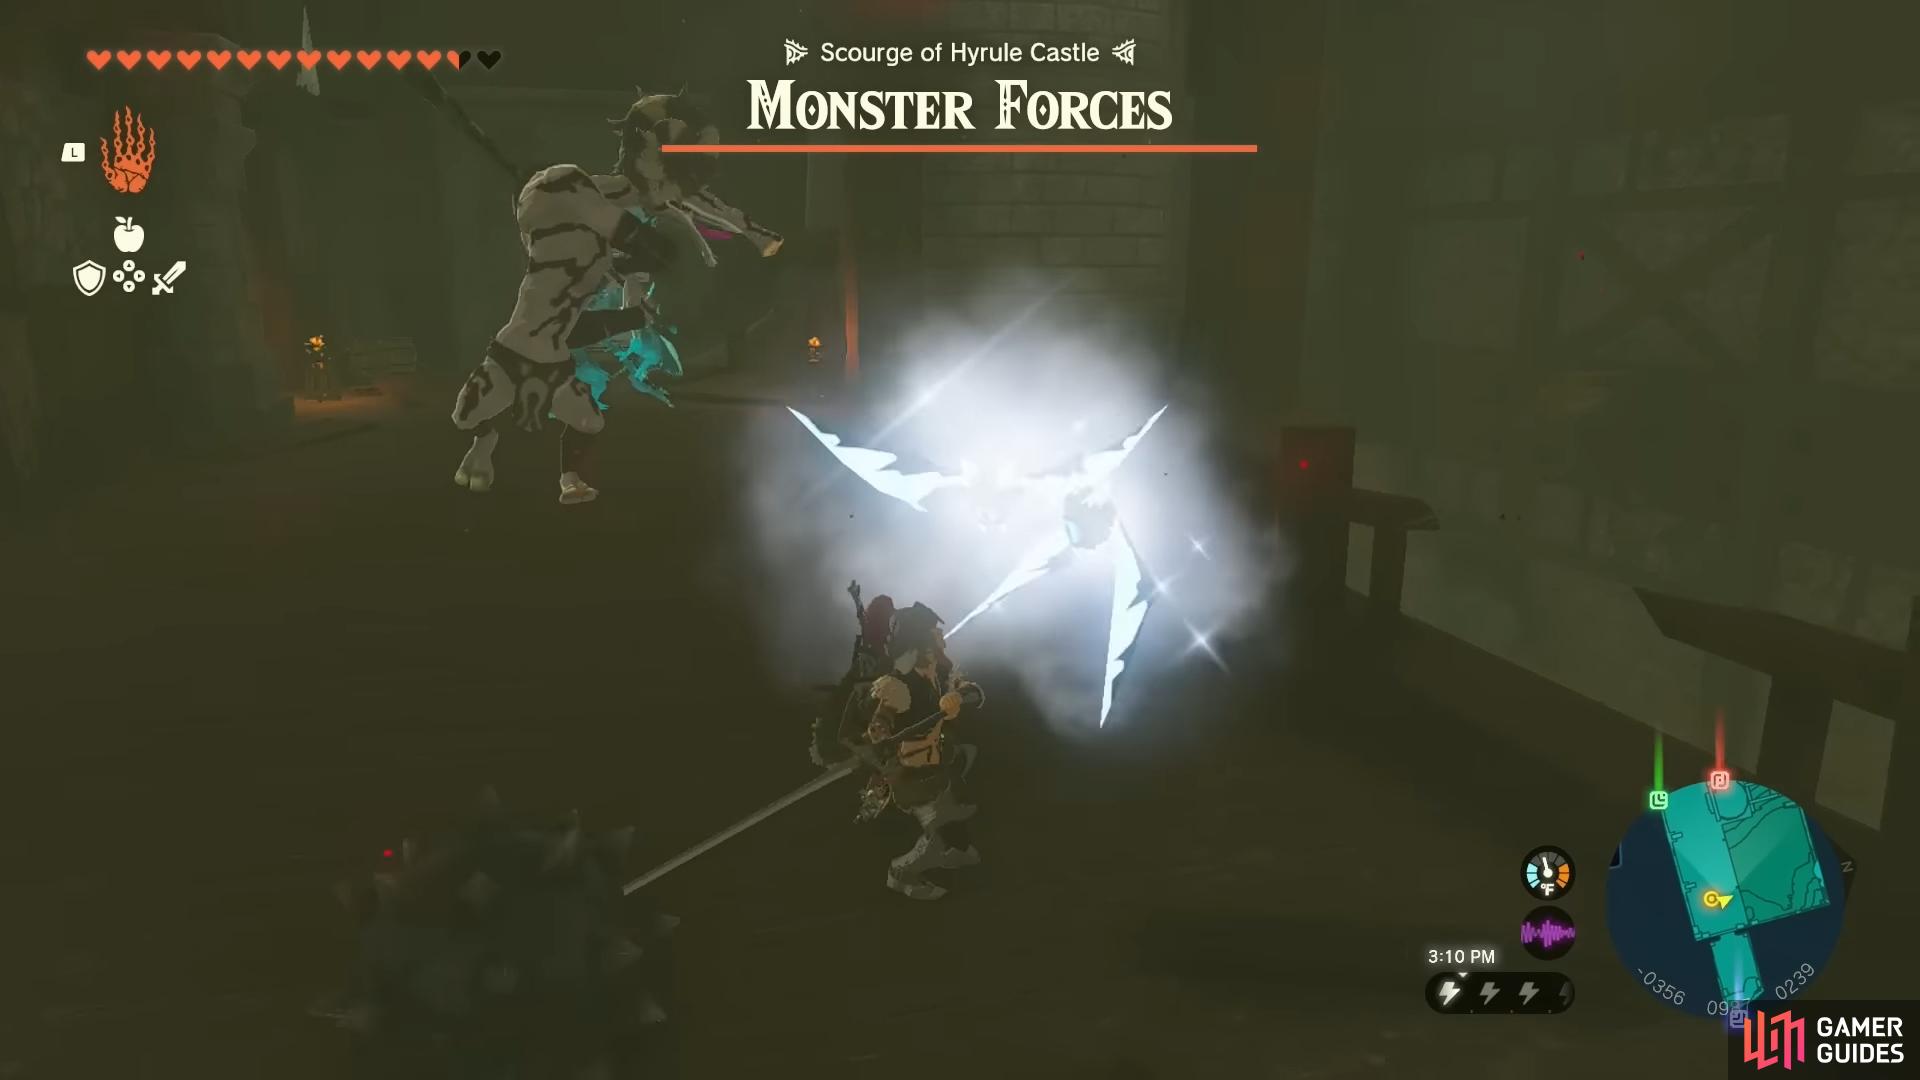 The fifth !Hyrule Castle Monster Forces battle containing !Ice Keese and a !Silver Moblin